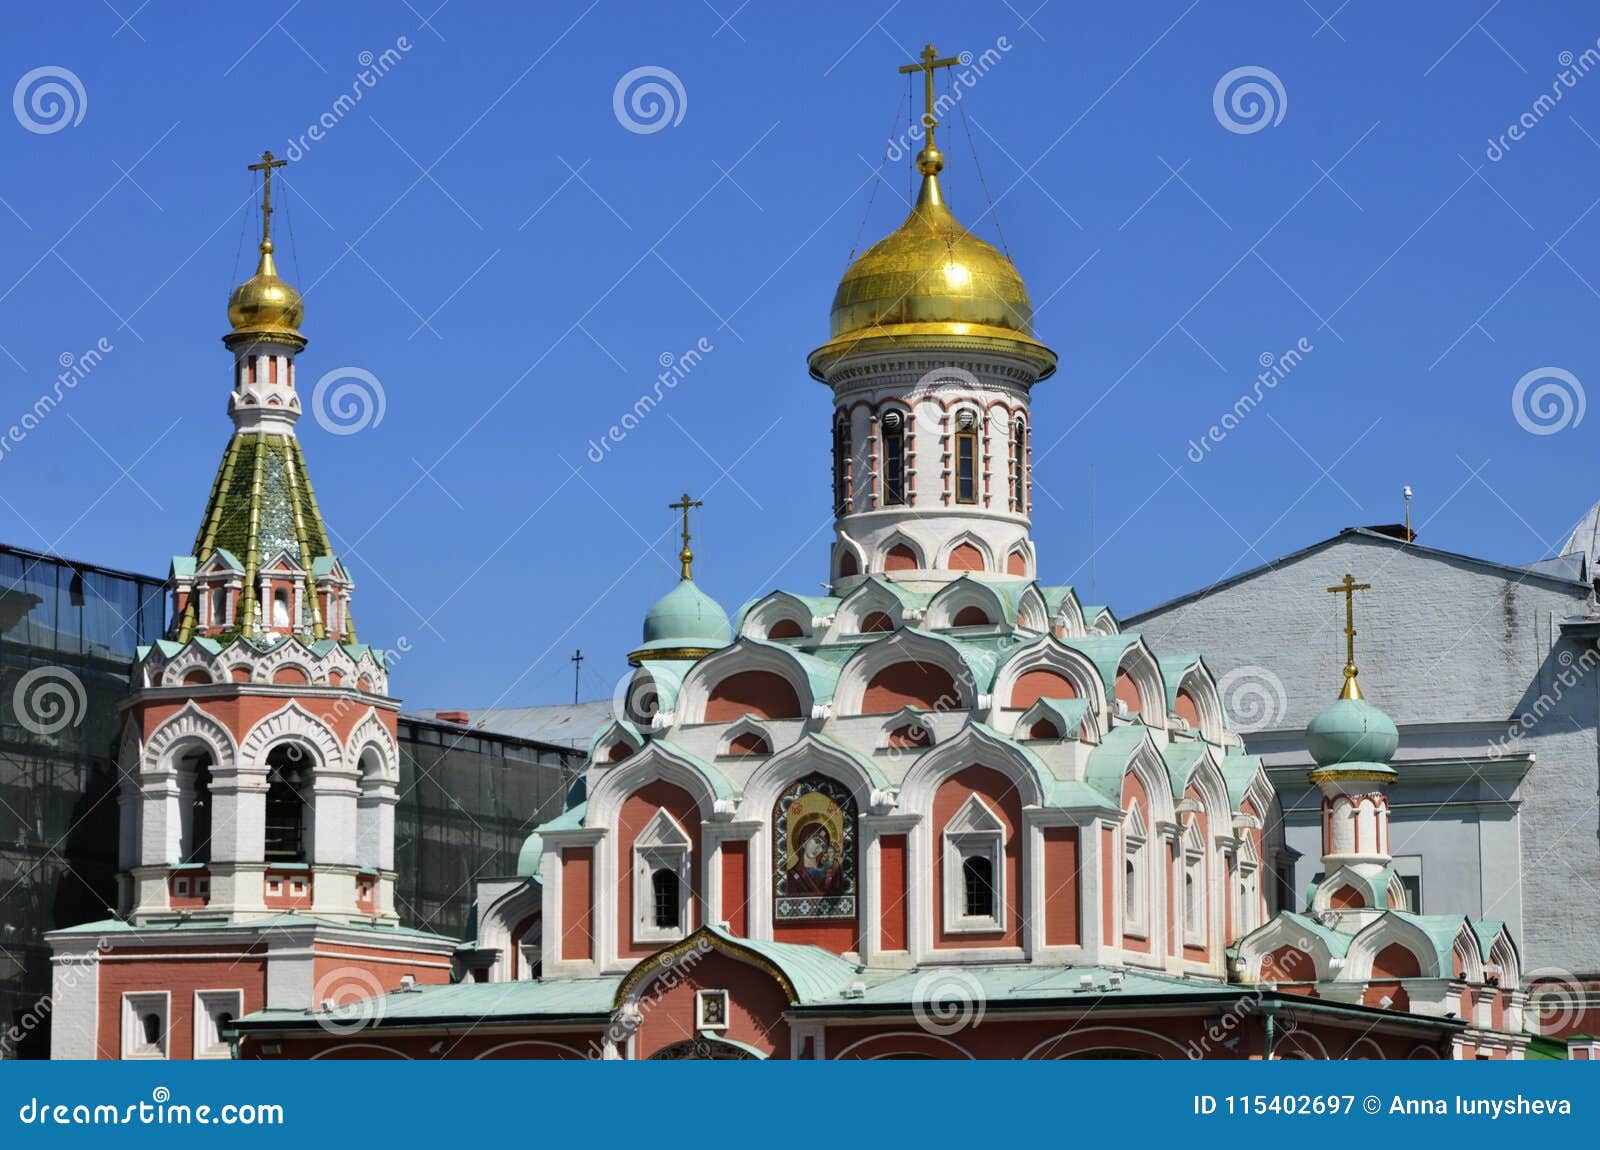 moscow. the dome of the kazan cathedral on red square is an active orthodox church, built in memory of the liberation of moscow fr